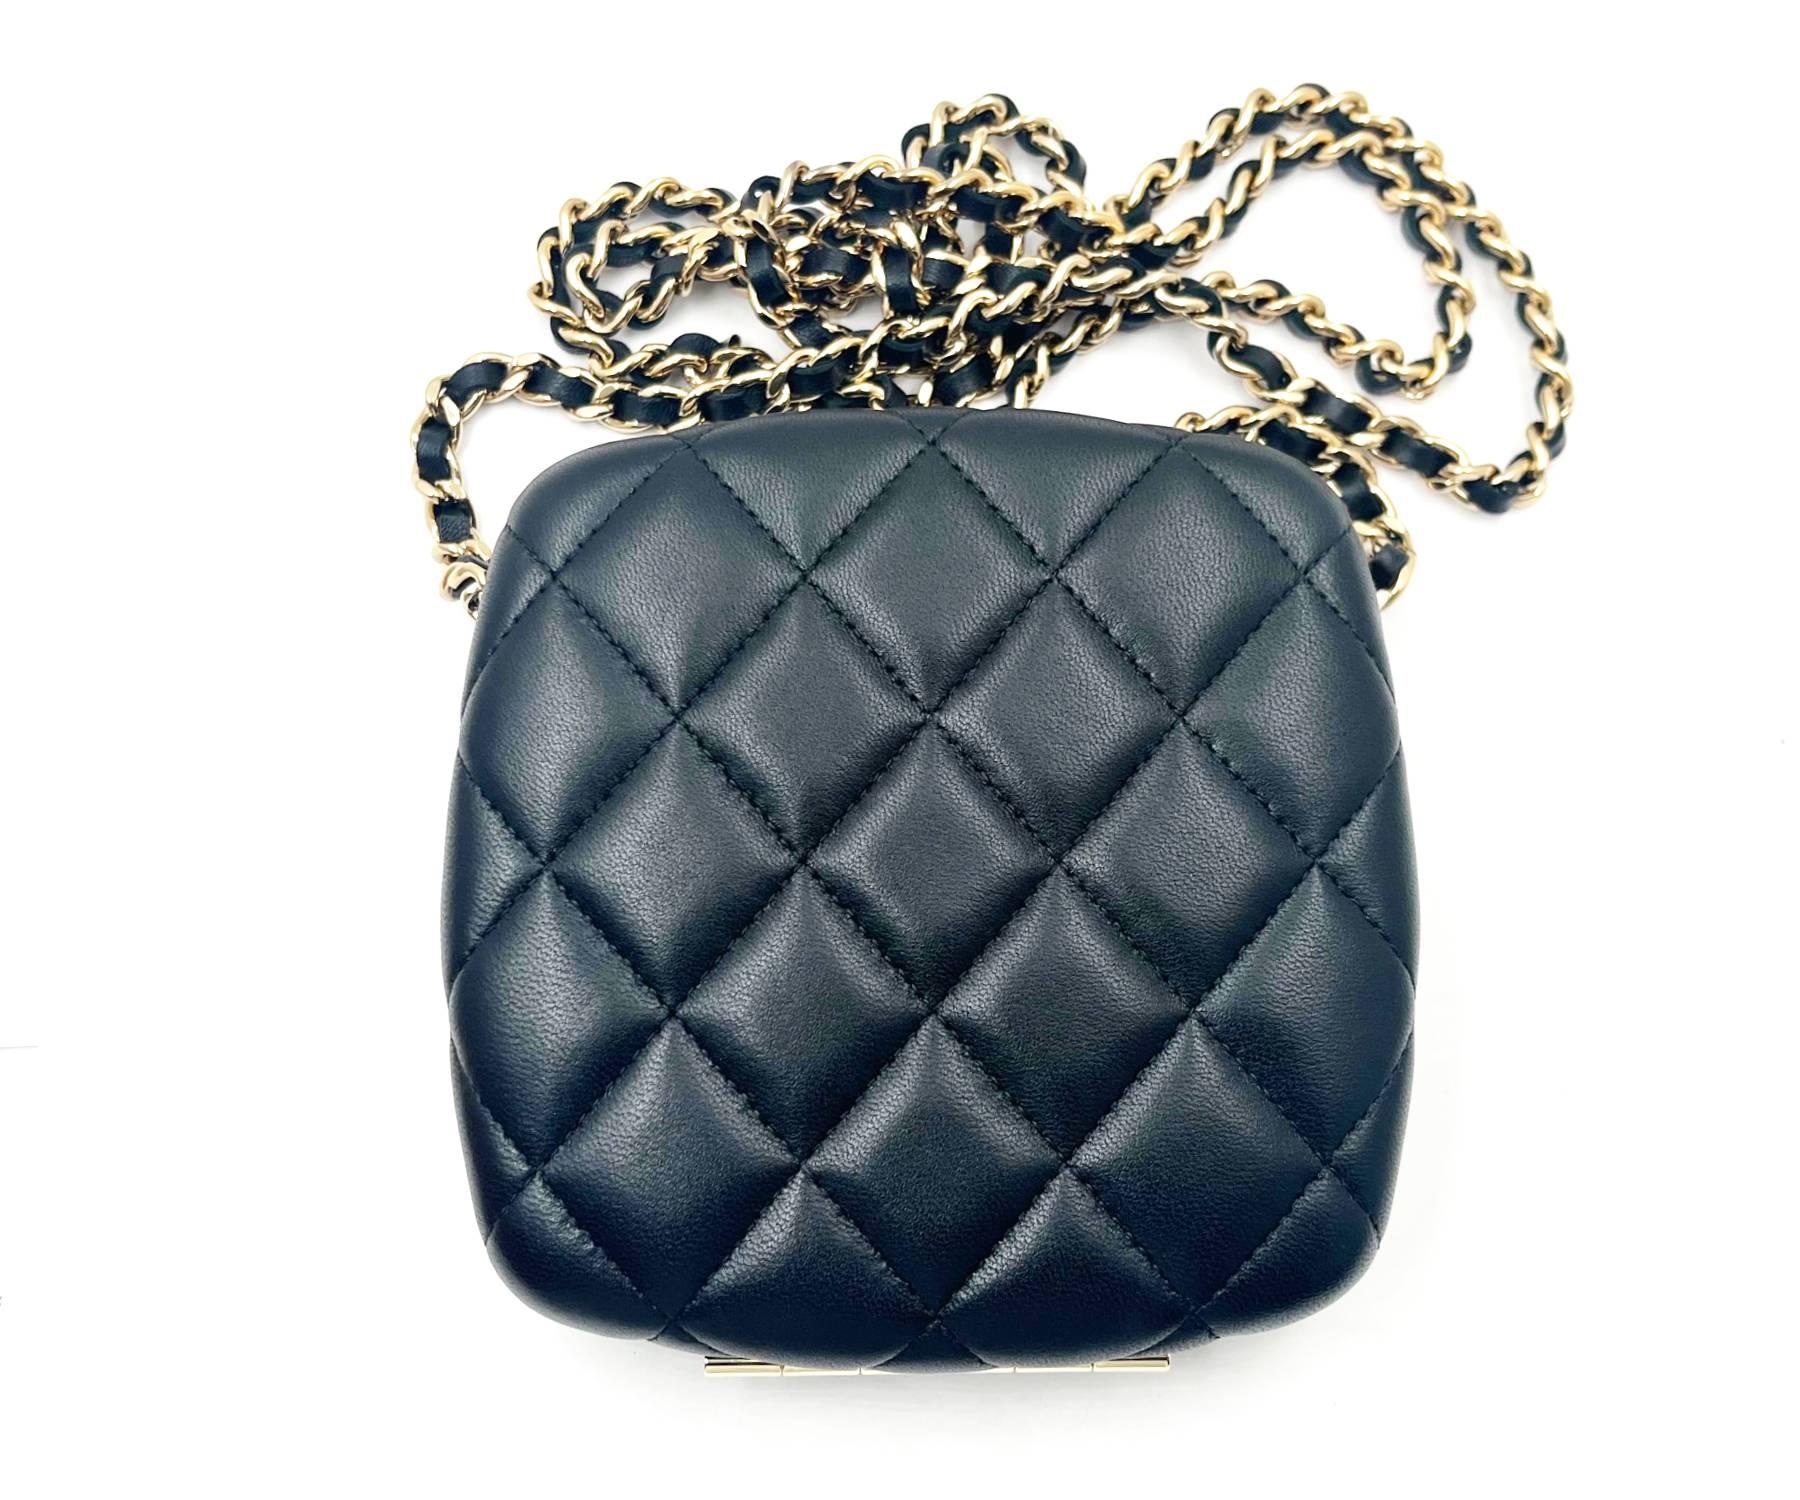 Chanel Brand New Black Quilted Hard Case Compact Vanity Crossbody Bag  In New Condition For Sale In Pasadena, CA